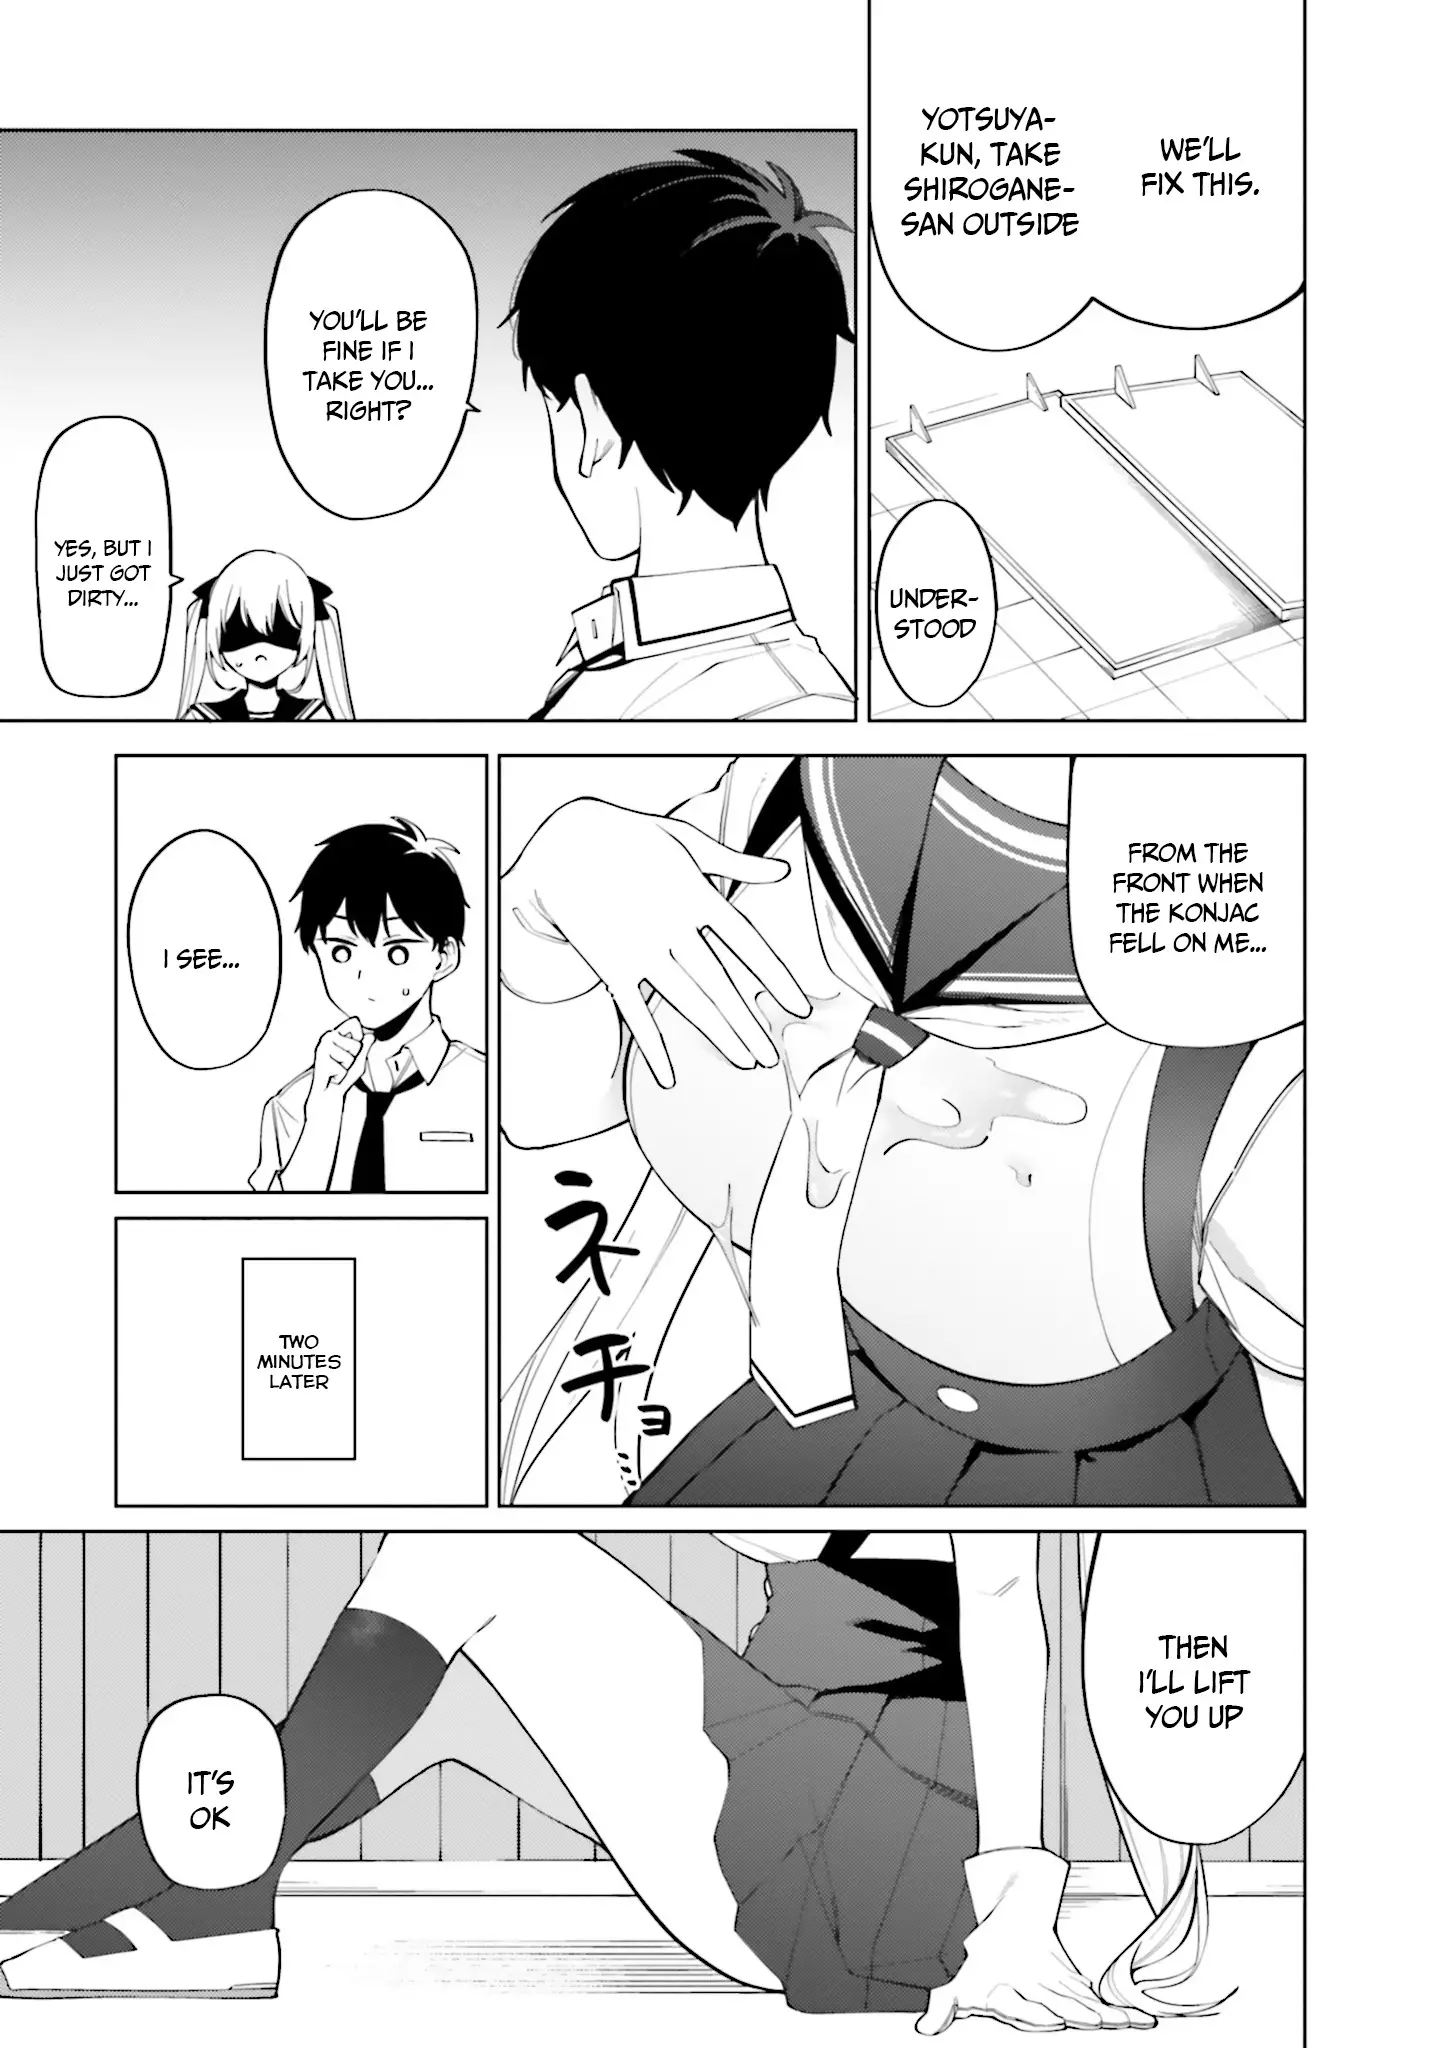 I Don't Understand Shirogane-San's Facial Expression At All - 12 page 20-a377a6d0